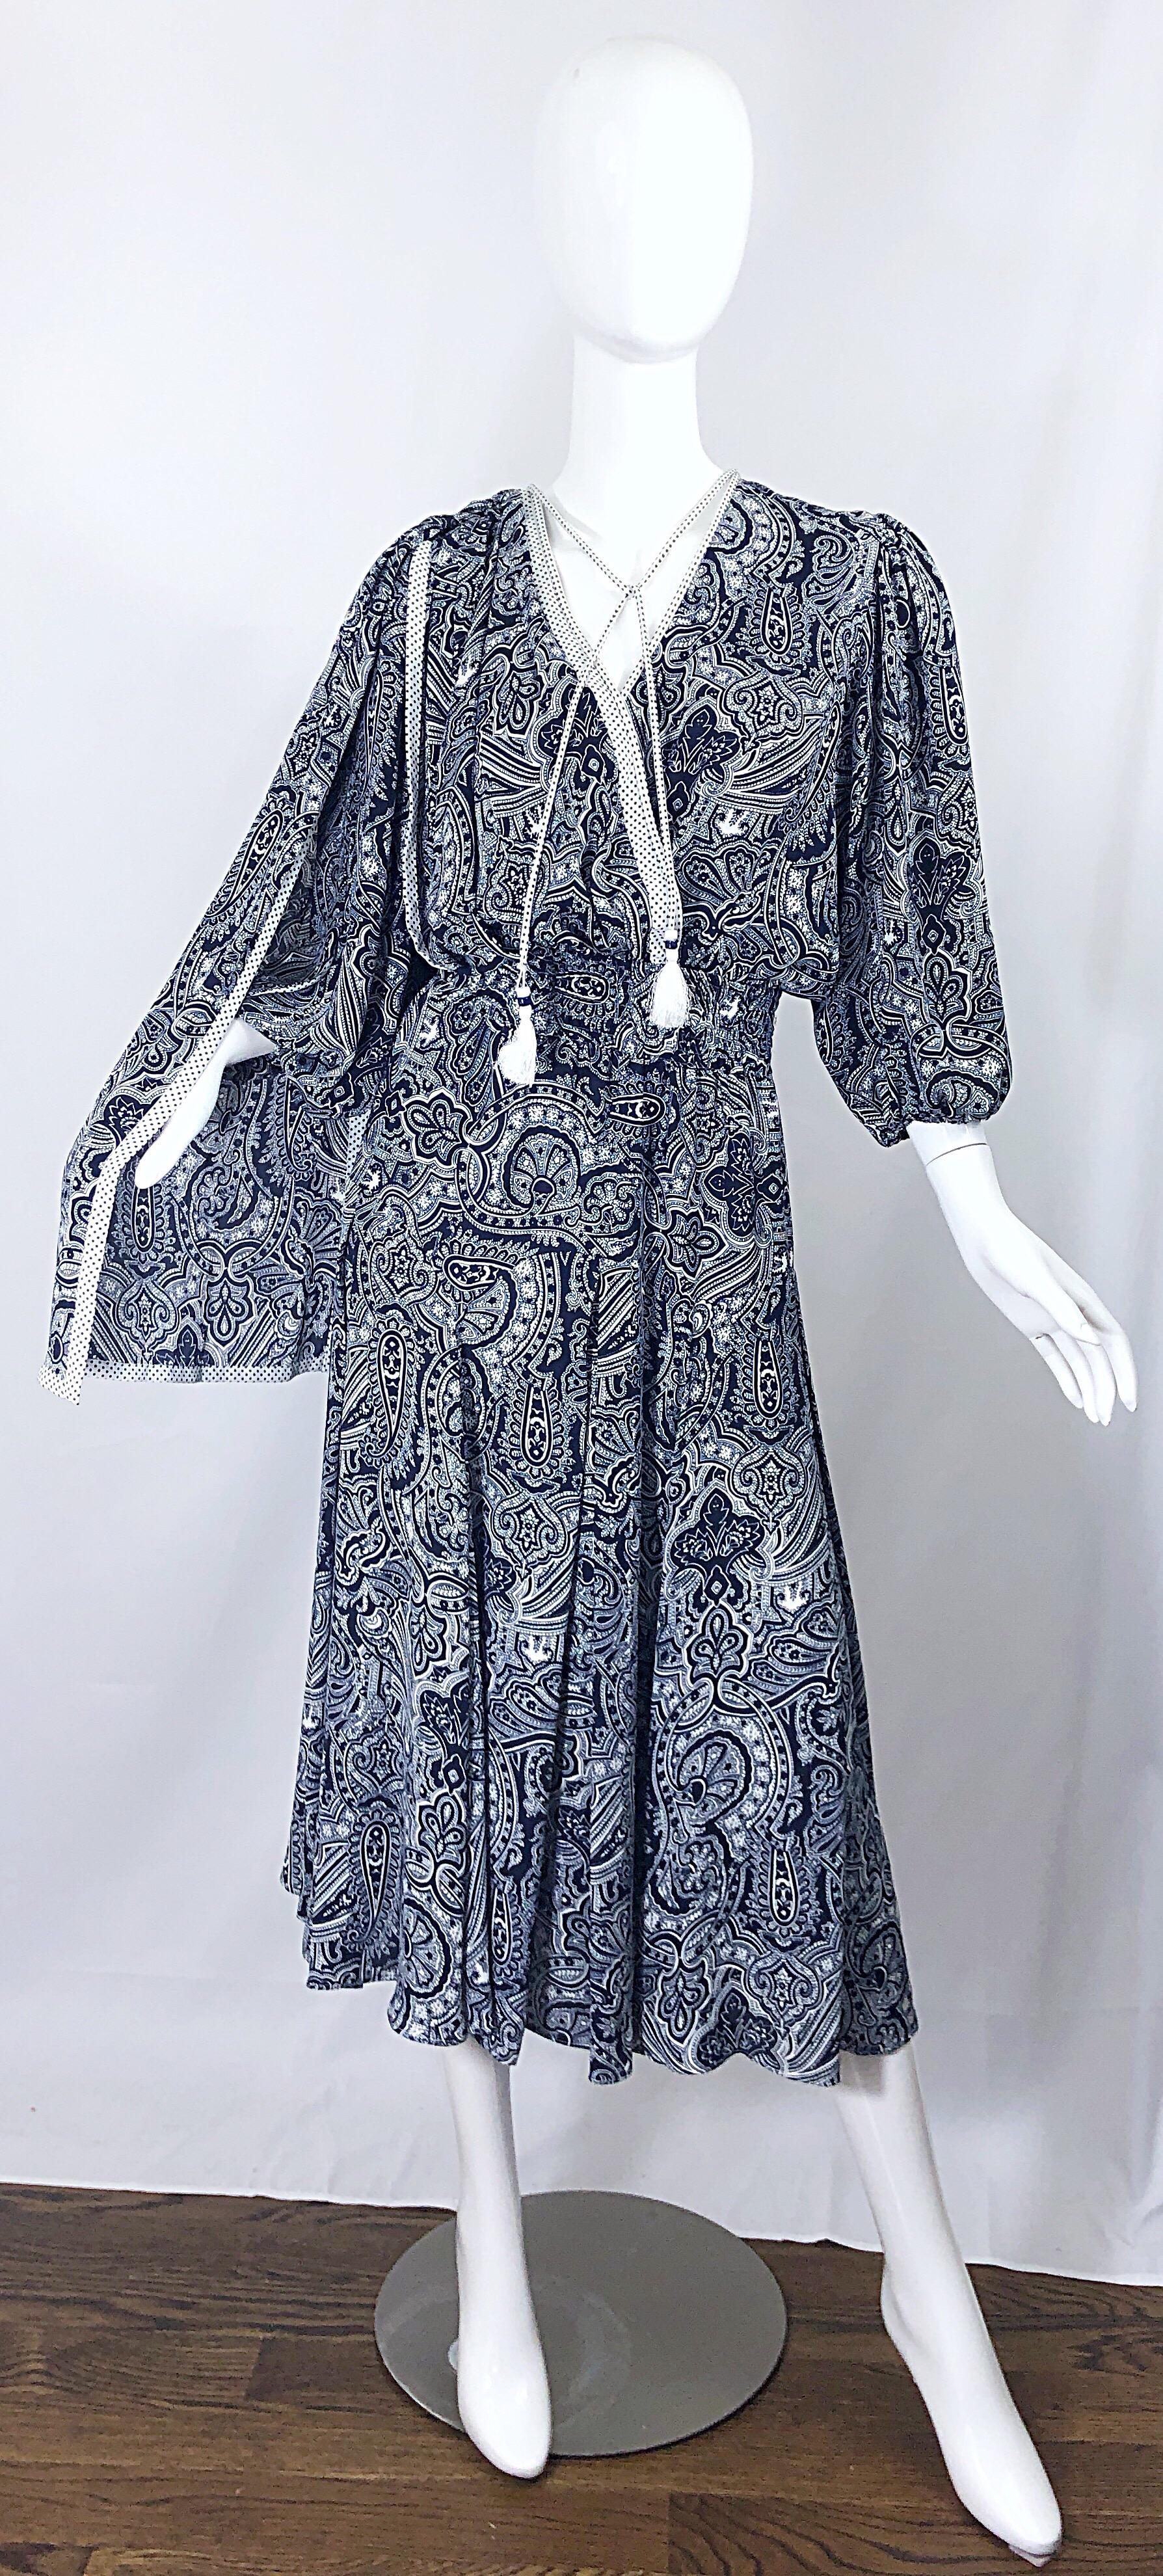 Incredible vintage DIANE FRES navy blue and white paisley bandanna print boho dress! Features an attached sash at back right side, and two tassels at the neck with beads and fringe. Elastic waistband stretches to fit most sizes. Can easily be